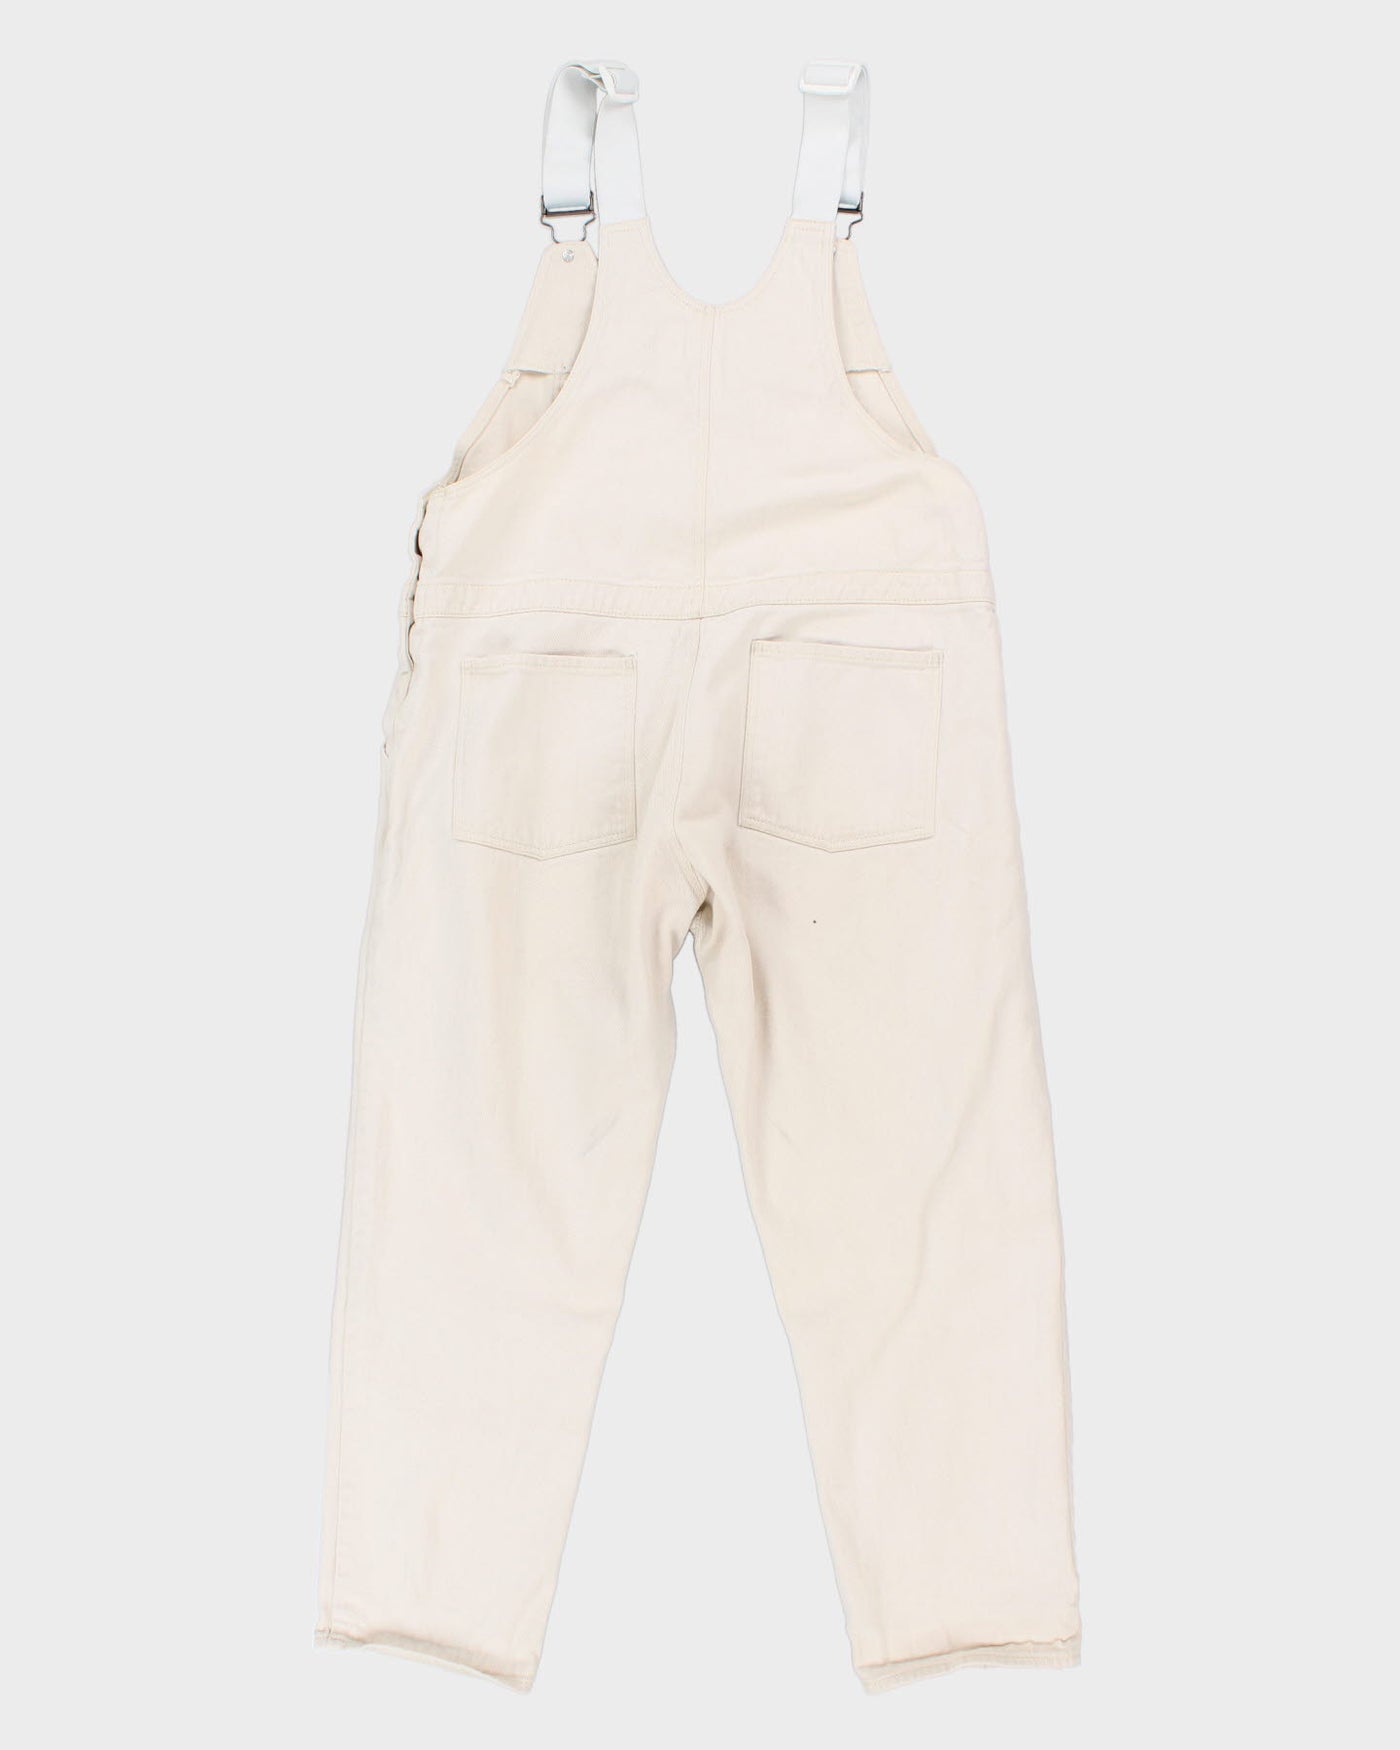 Old Fashioned Standards Full Length Cream Dungarees - L/XL